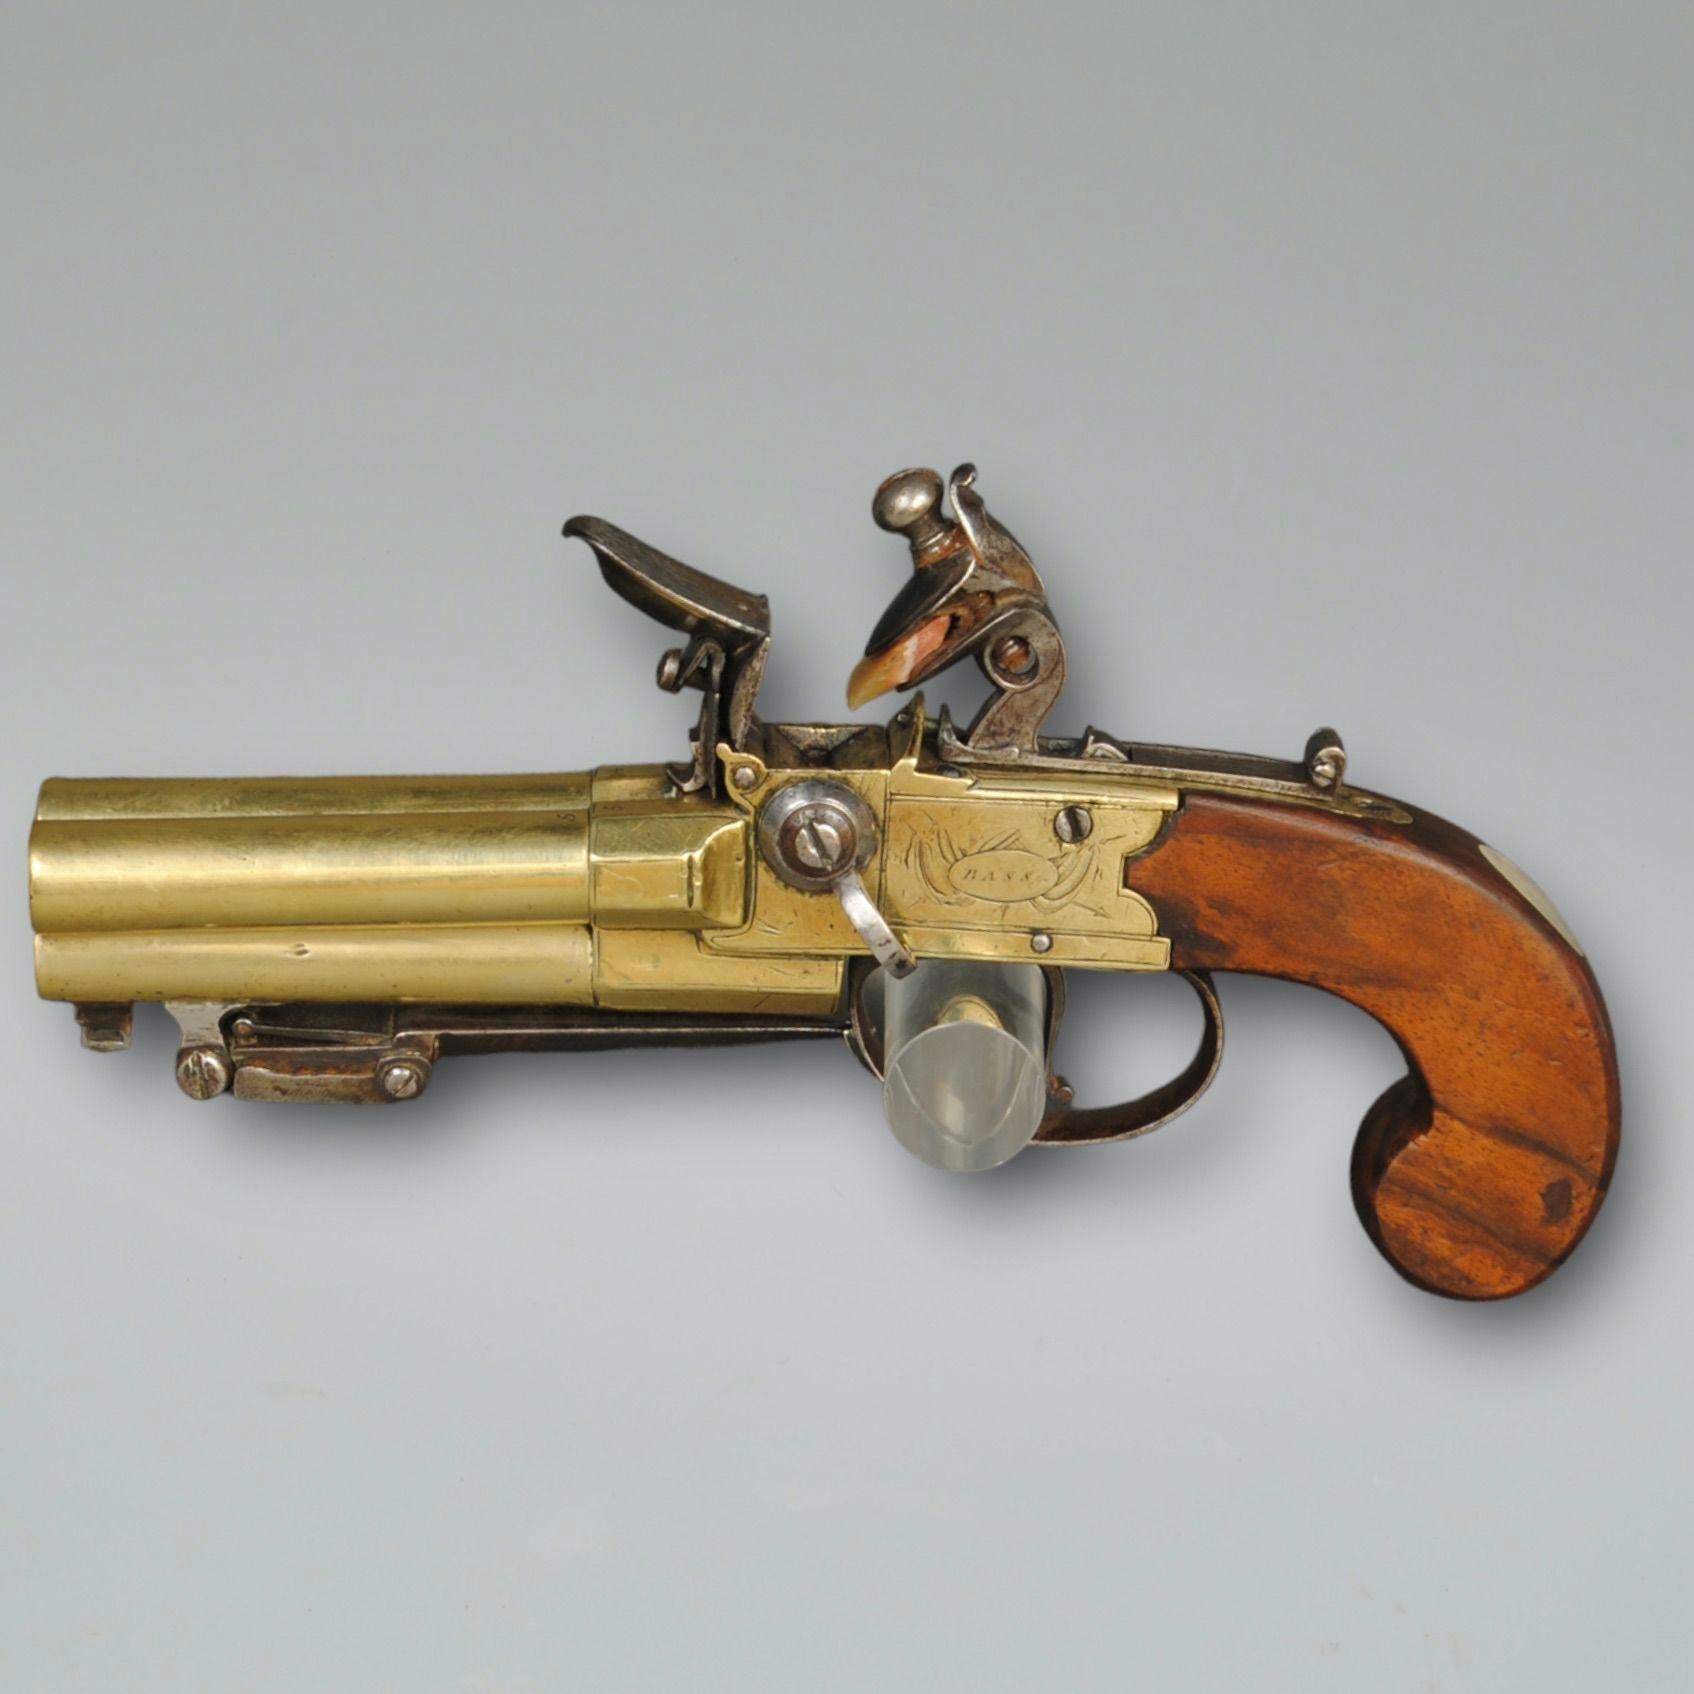 A rare late 18th century triple barrel boxlock, tap action pocket pistol by Bass, London, with bayonet below the middle barrel 
Proof marks next to sliding trigger to release the bayonet.
Barrel length 7cm